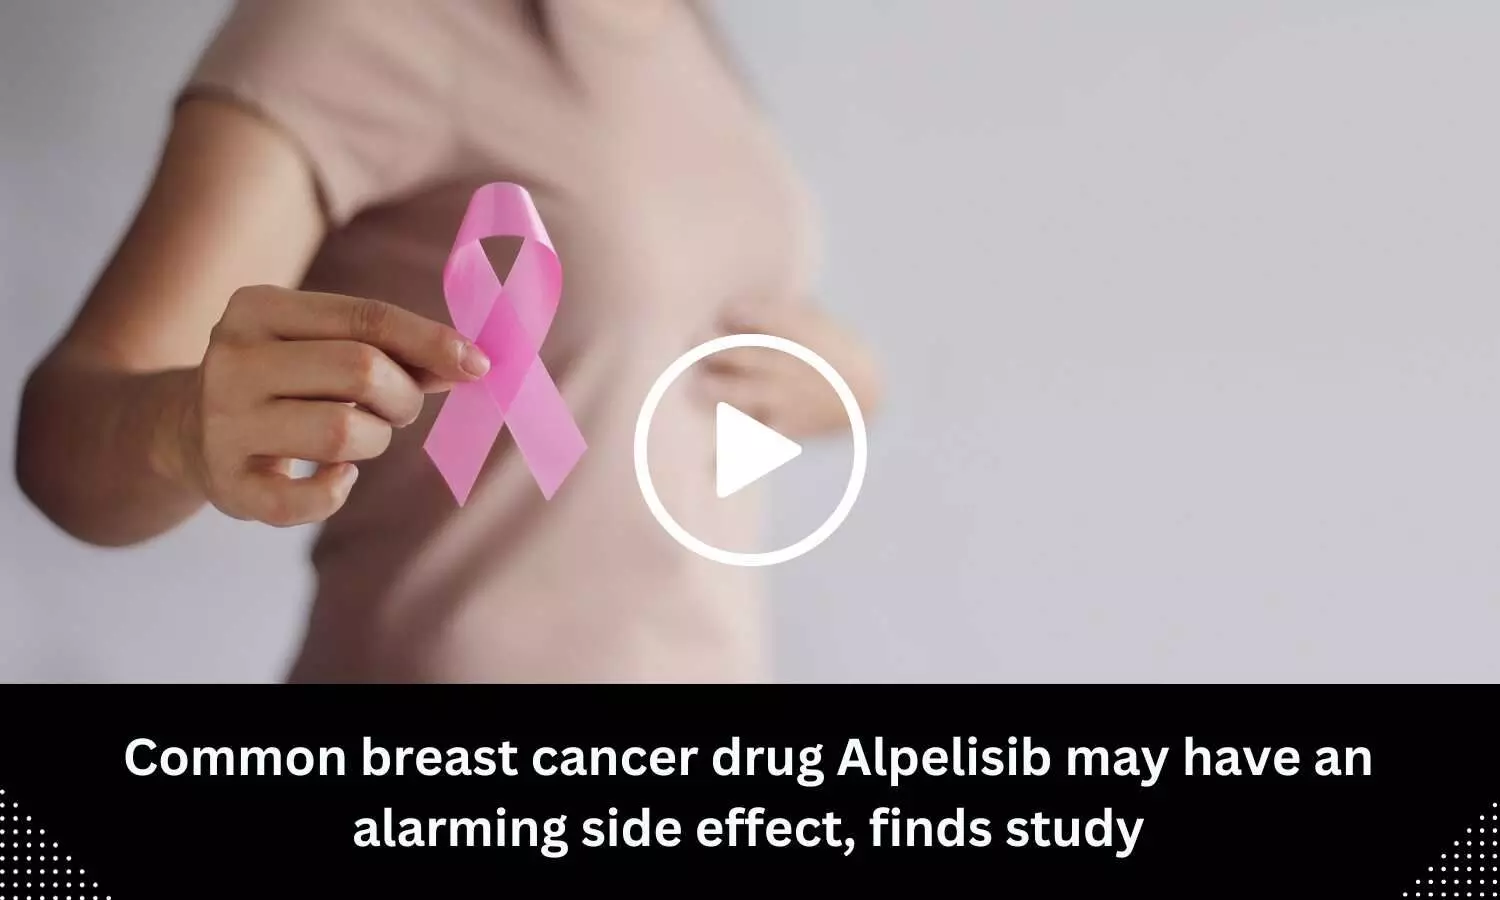 Common breast cancer drug Alpelisib may have an alarming side effect, finds study